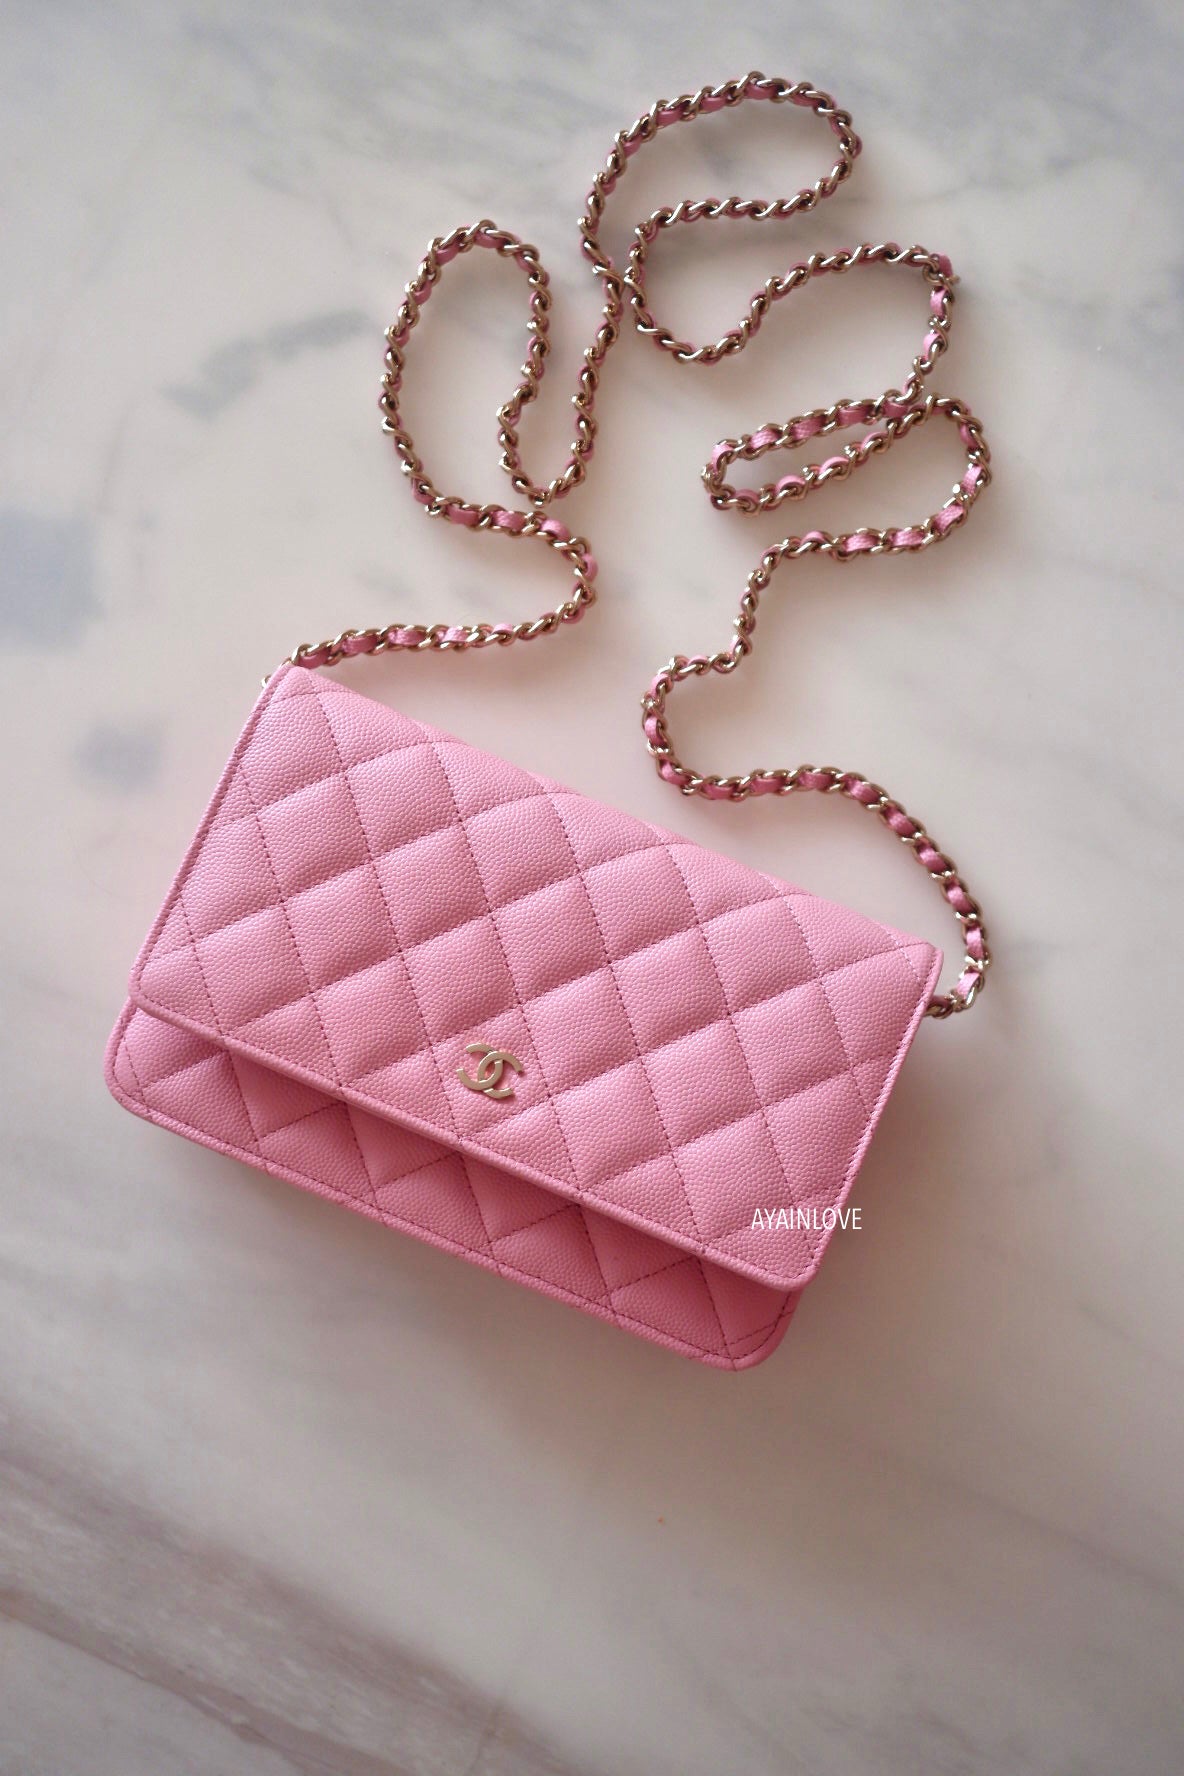 CHANEL, Accessories, Chanel Card Holder 22c Pink